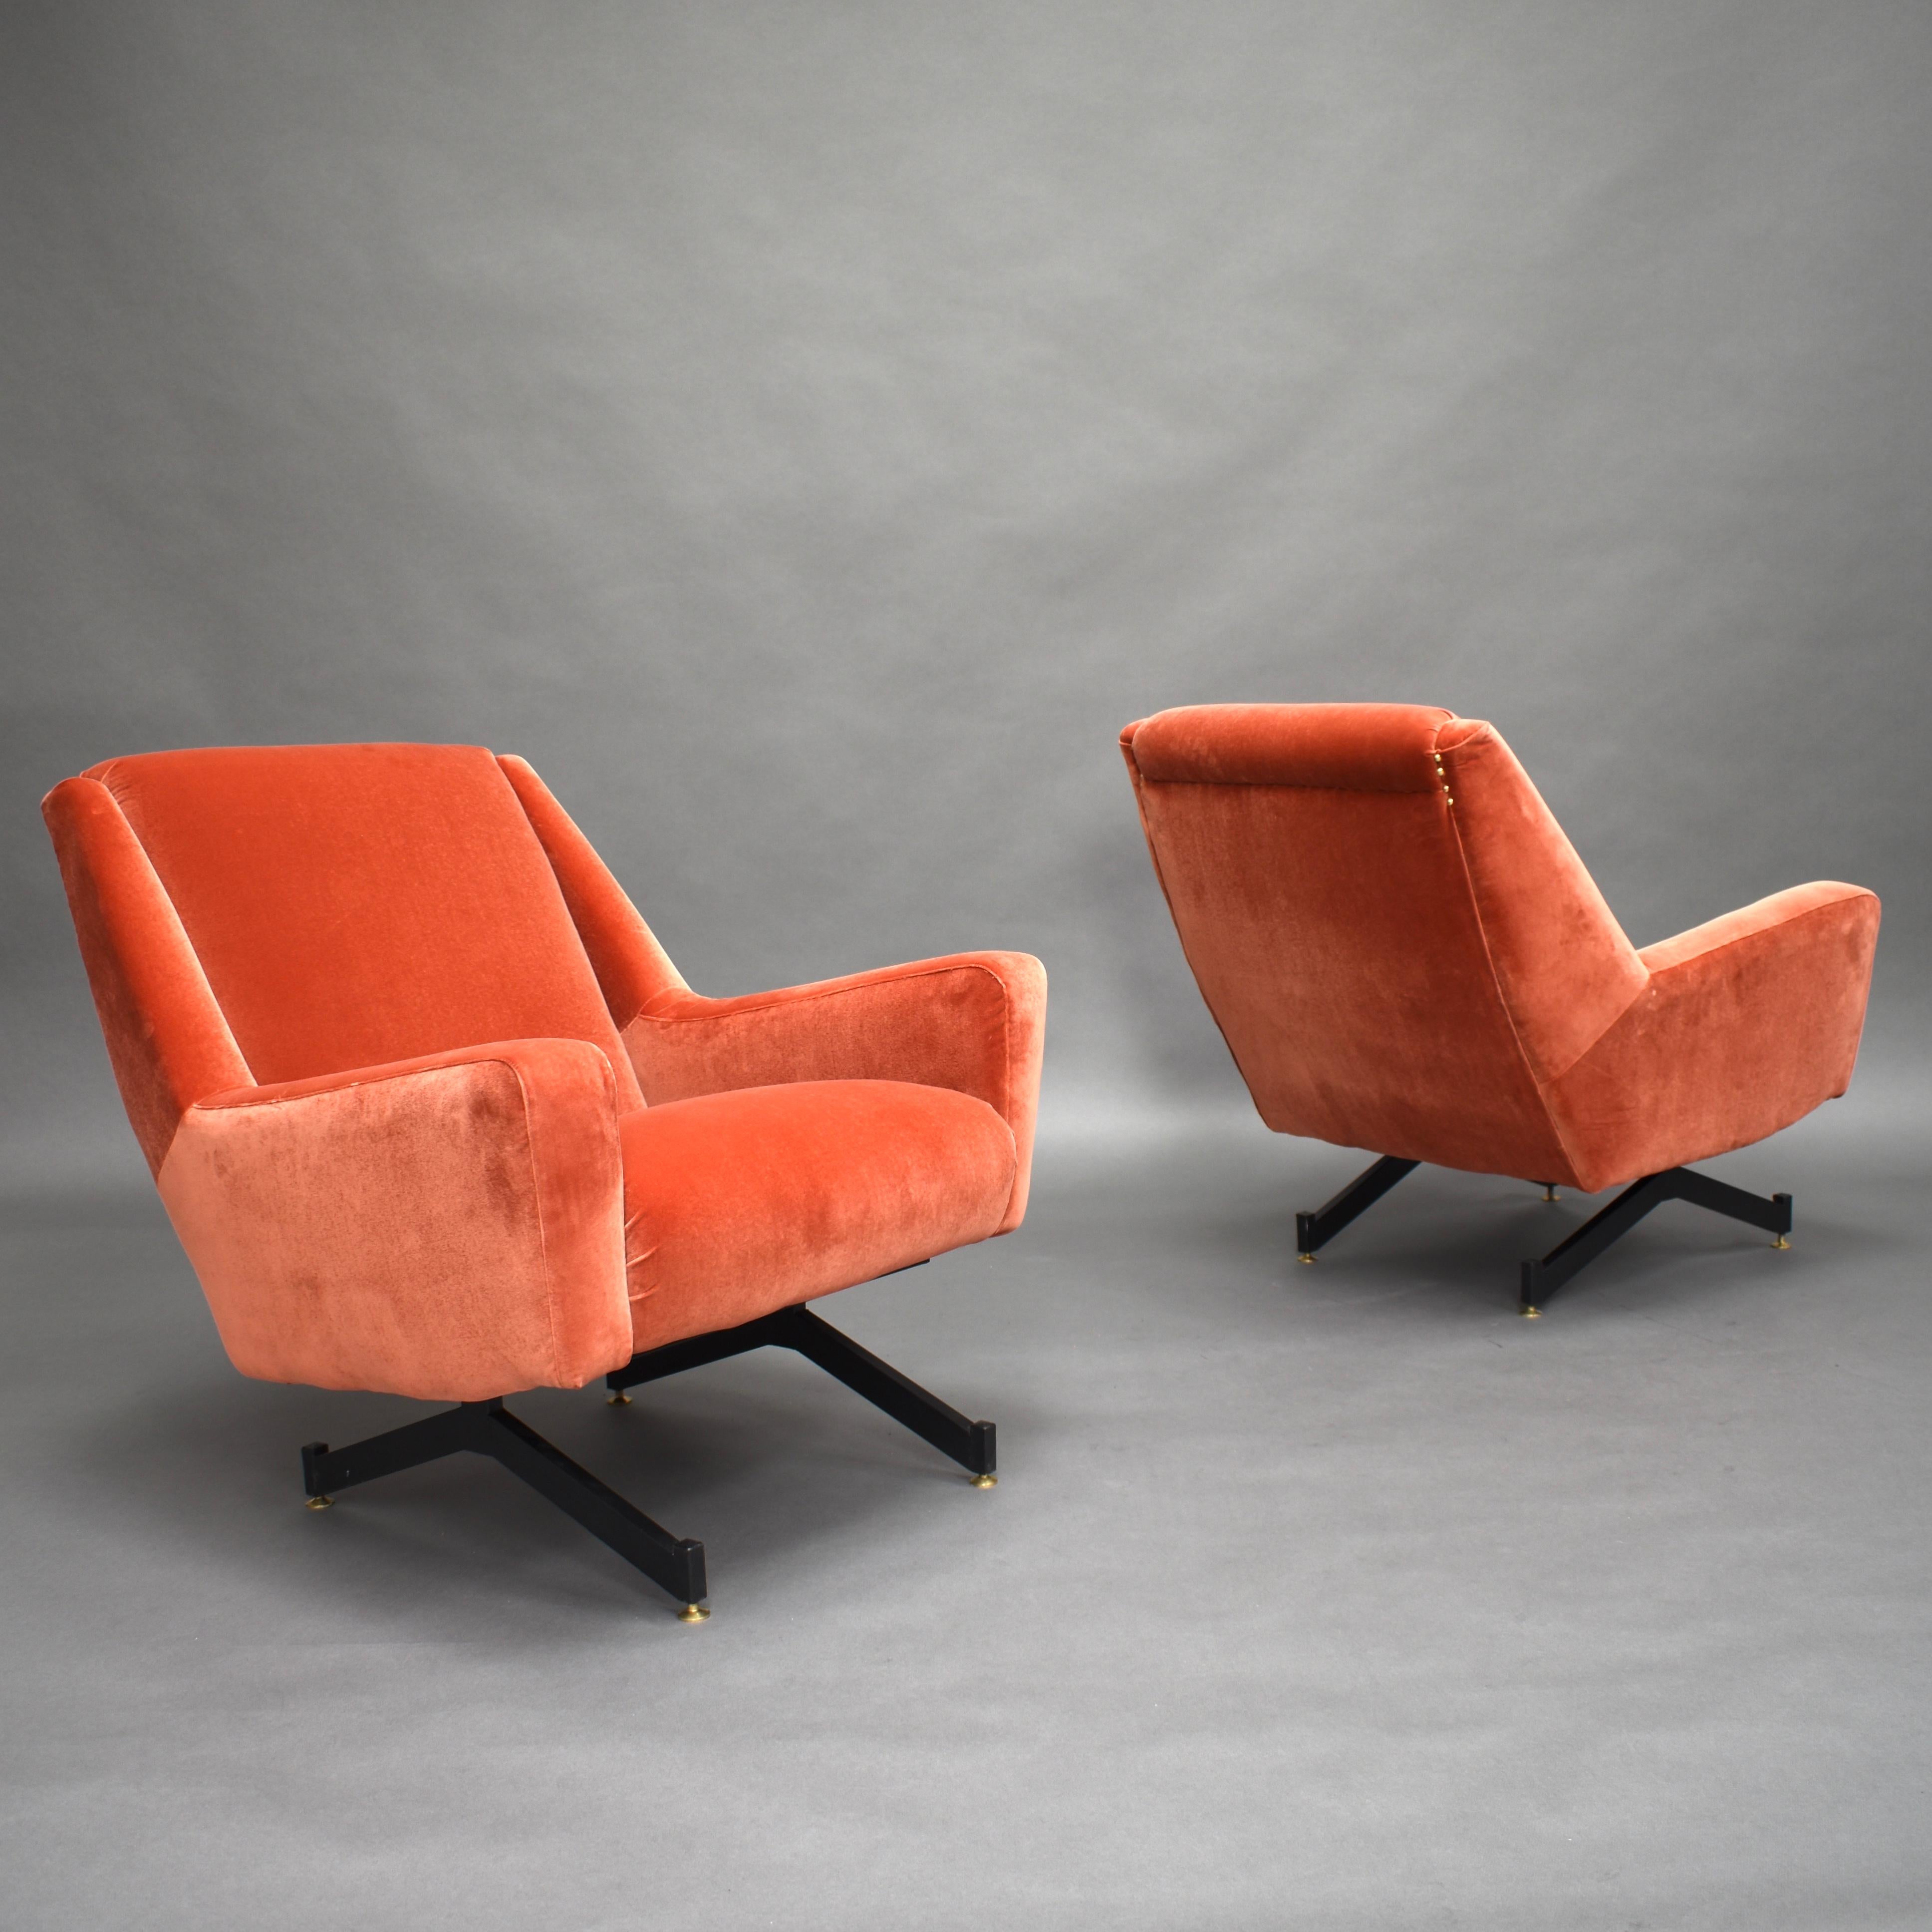 Gorgeous pair of Italian armchairs with new copper pink velvet upholstery.

They feature a black lacquered metal base and four brass feet that can be adjusted in height by turning the feet (for leveling). The metal base gives the chairs a floating